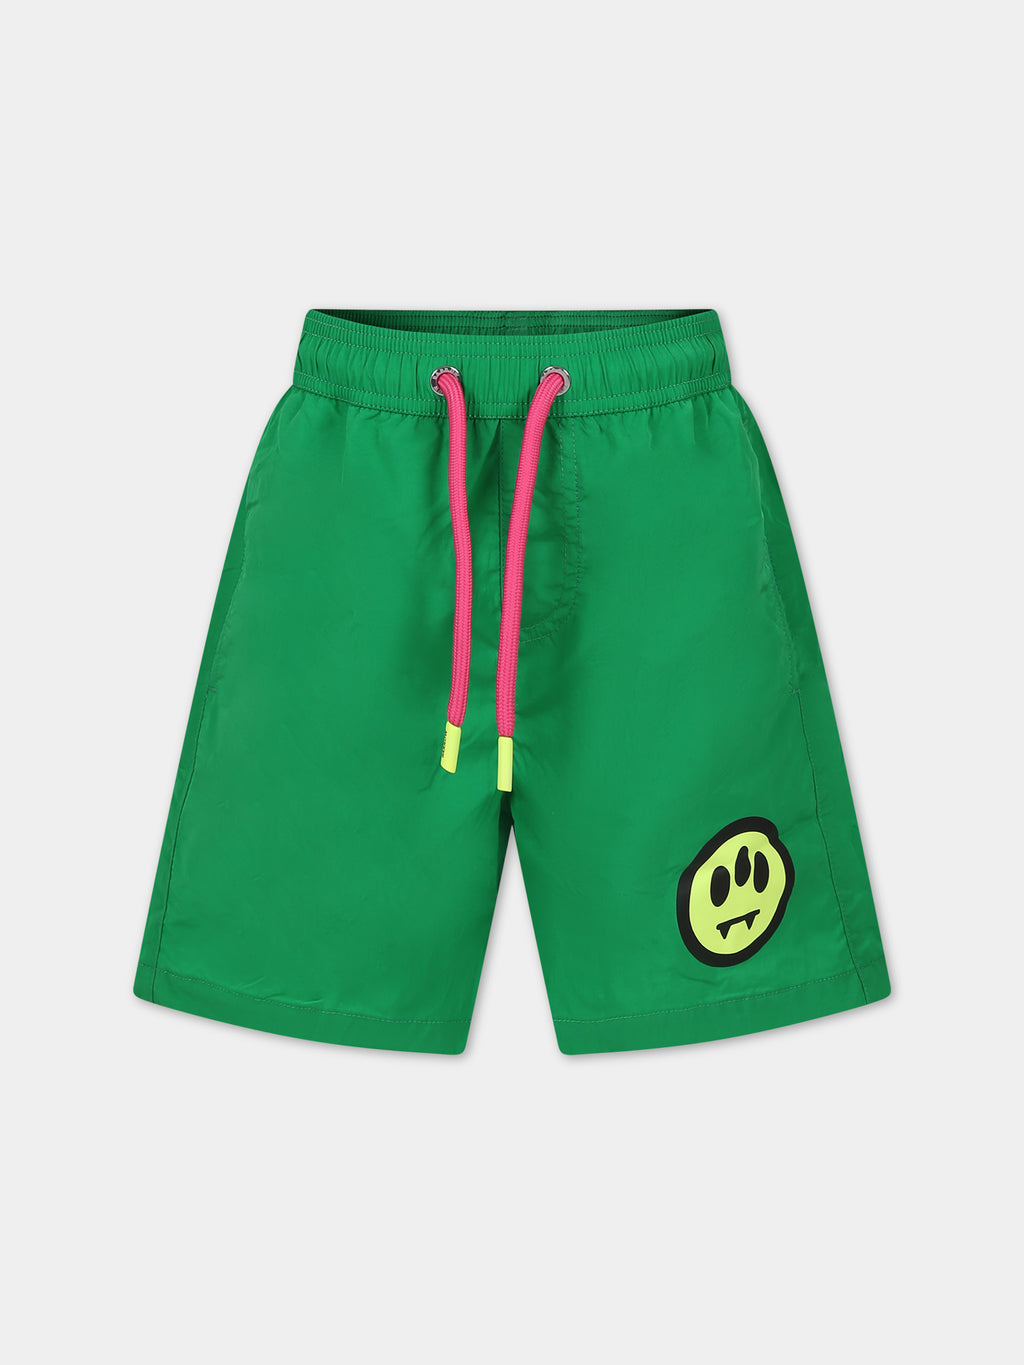 Green swim shorts for boy with smiley